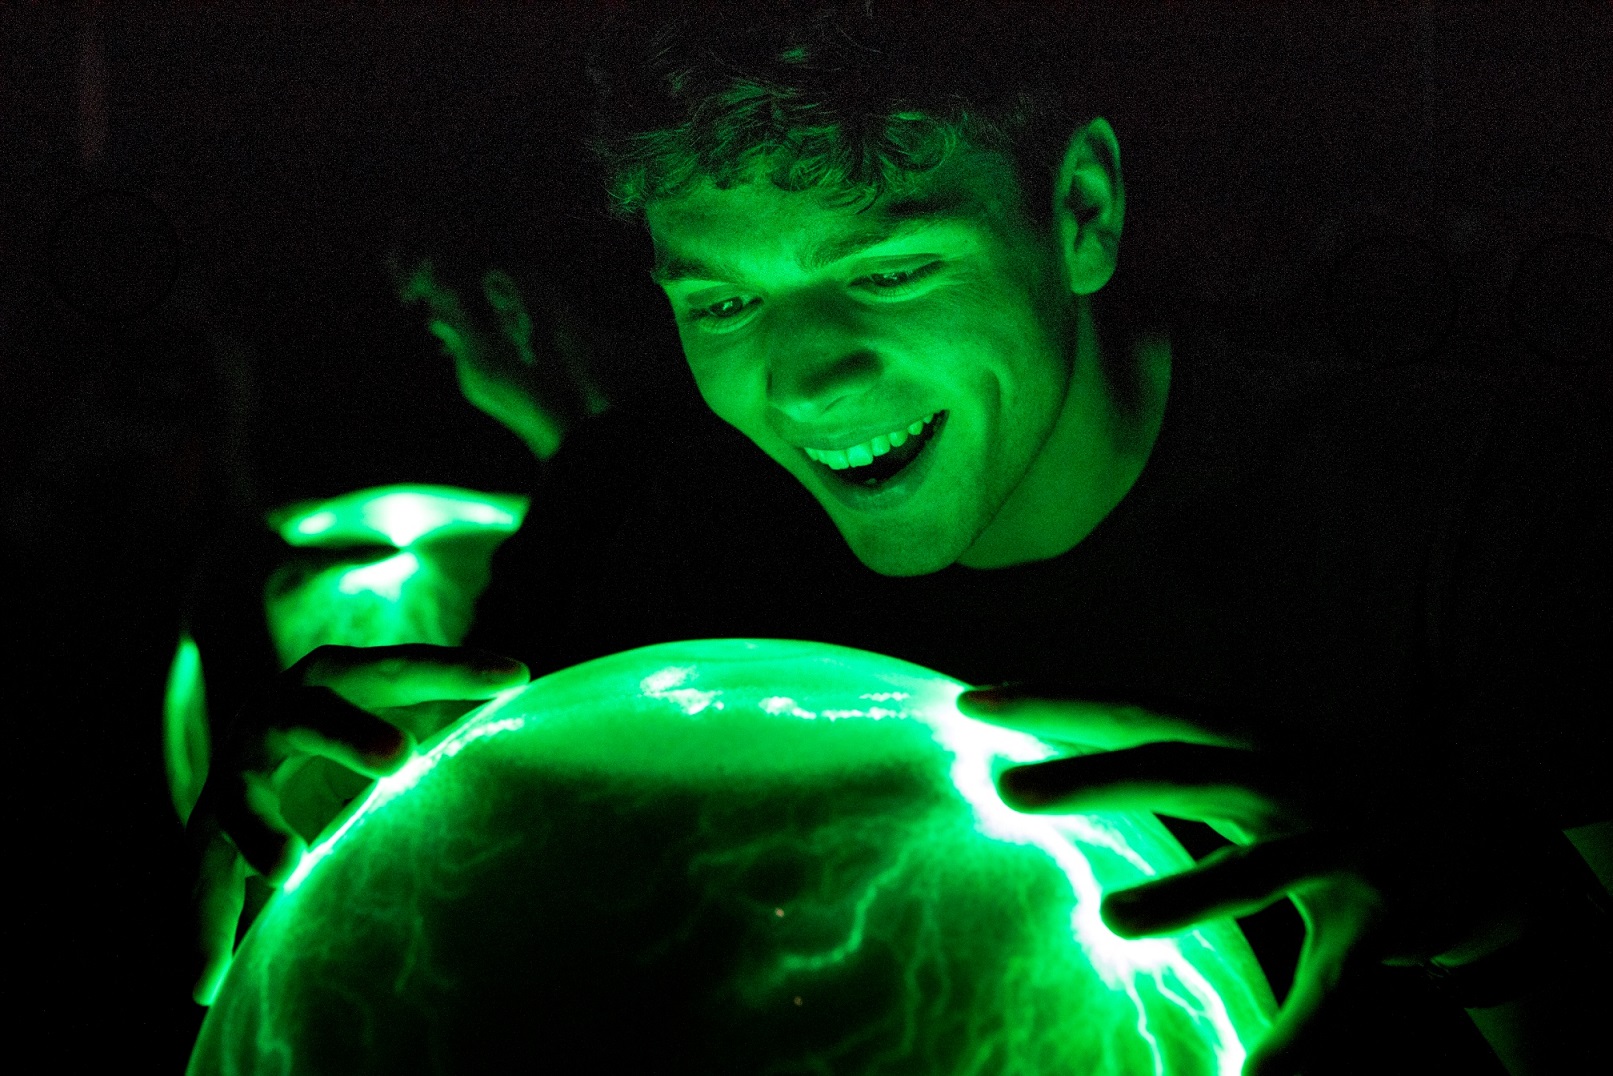 A man looking over sphere with lighting bolts, and illuminated bright neon green.